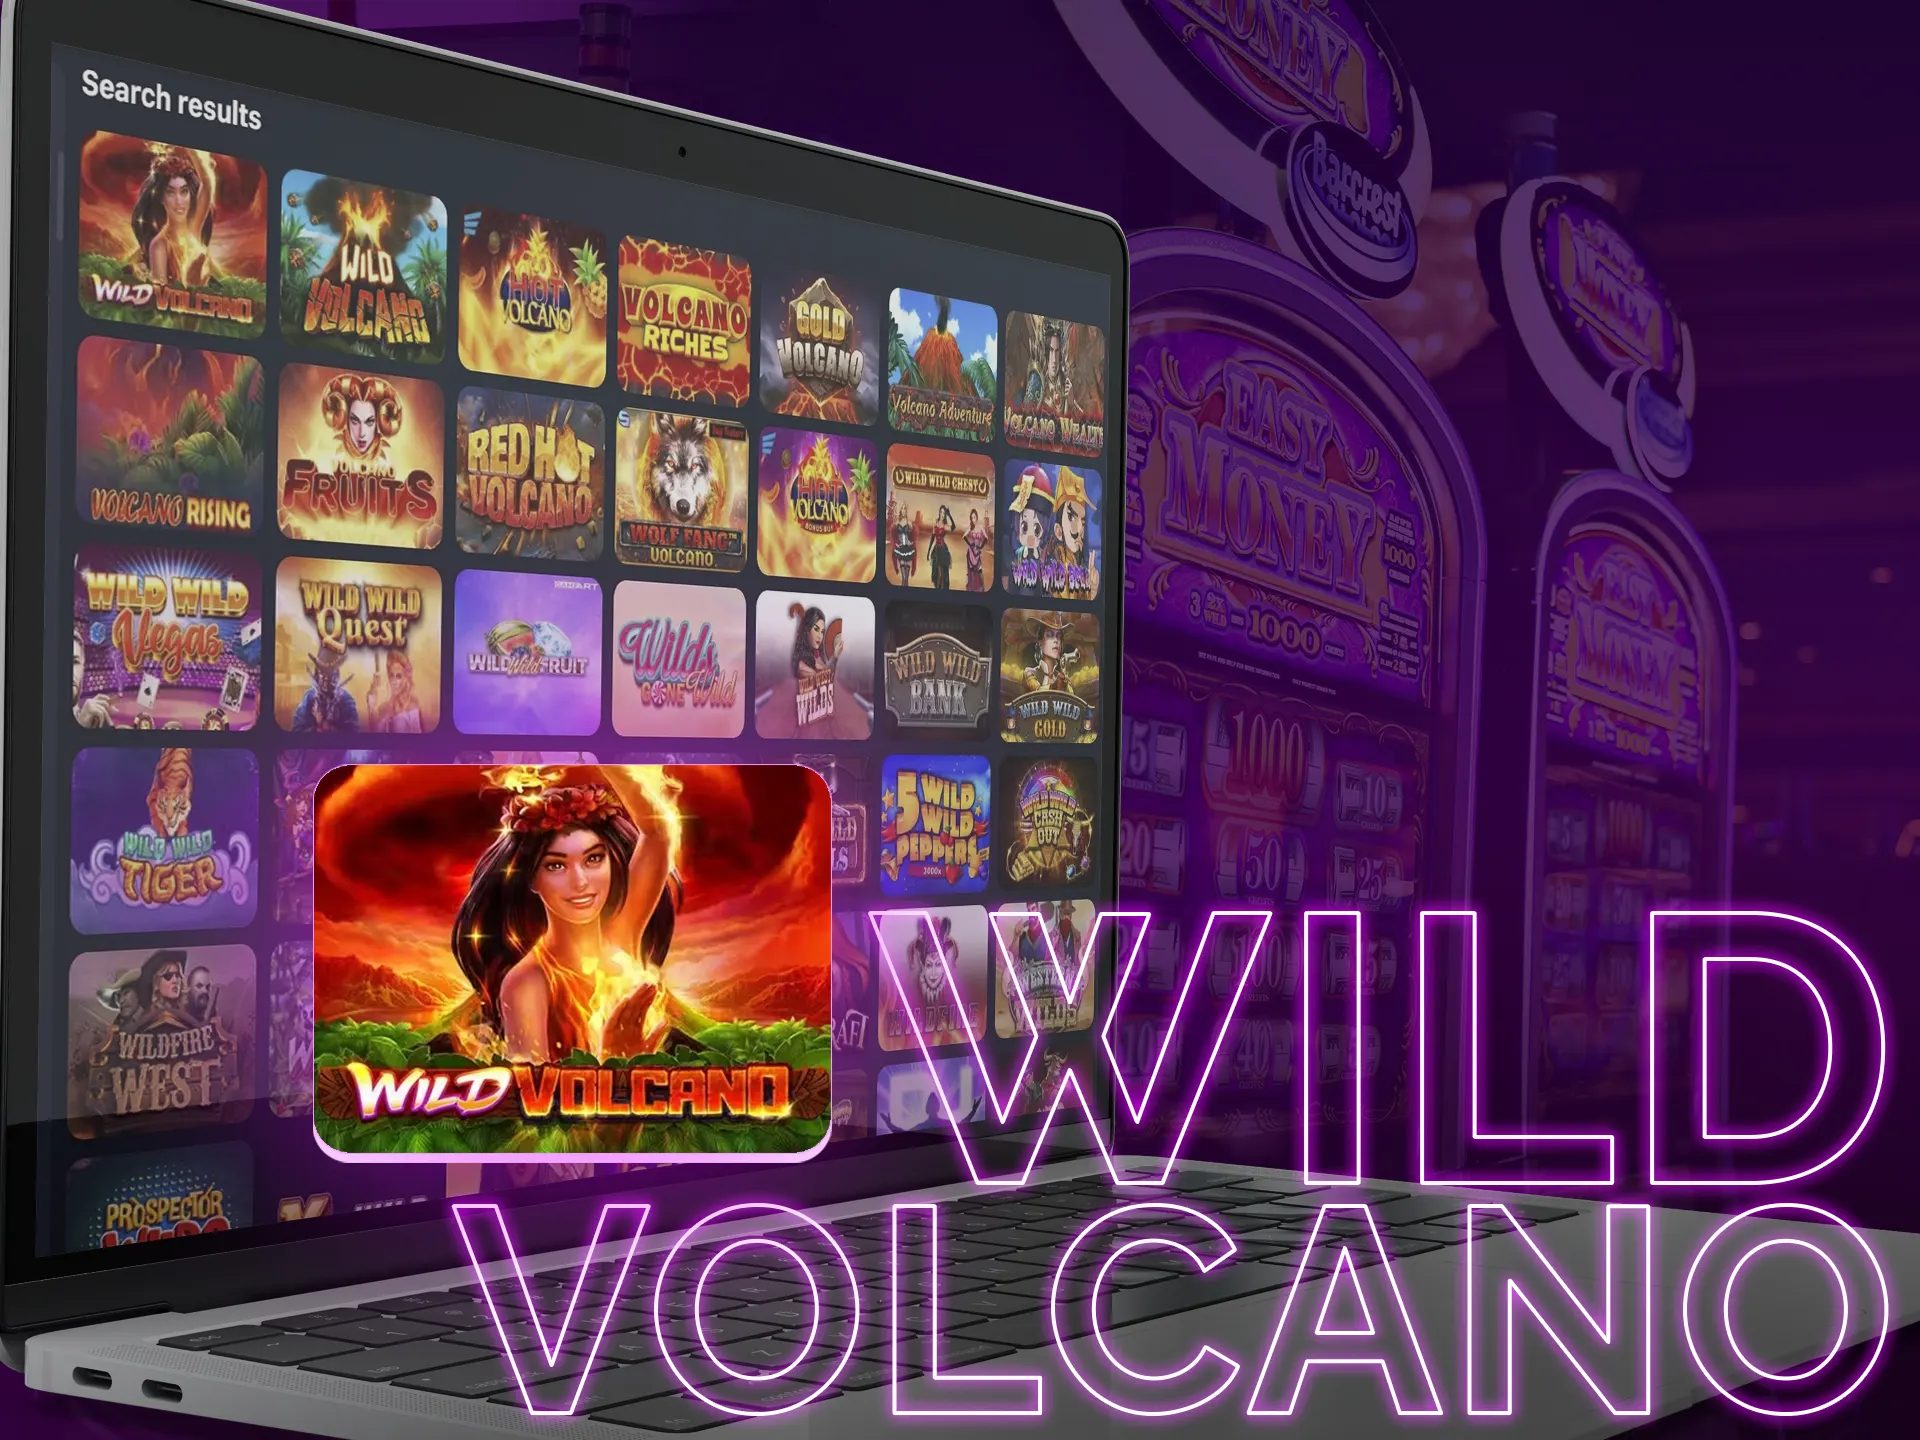 In the Wild Volcano game, get a goddess themed image in a row for maximum points.